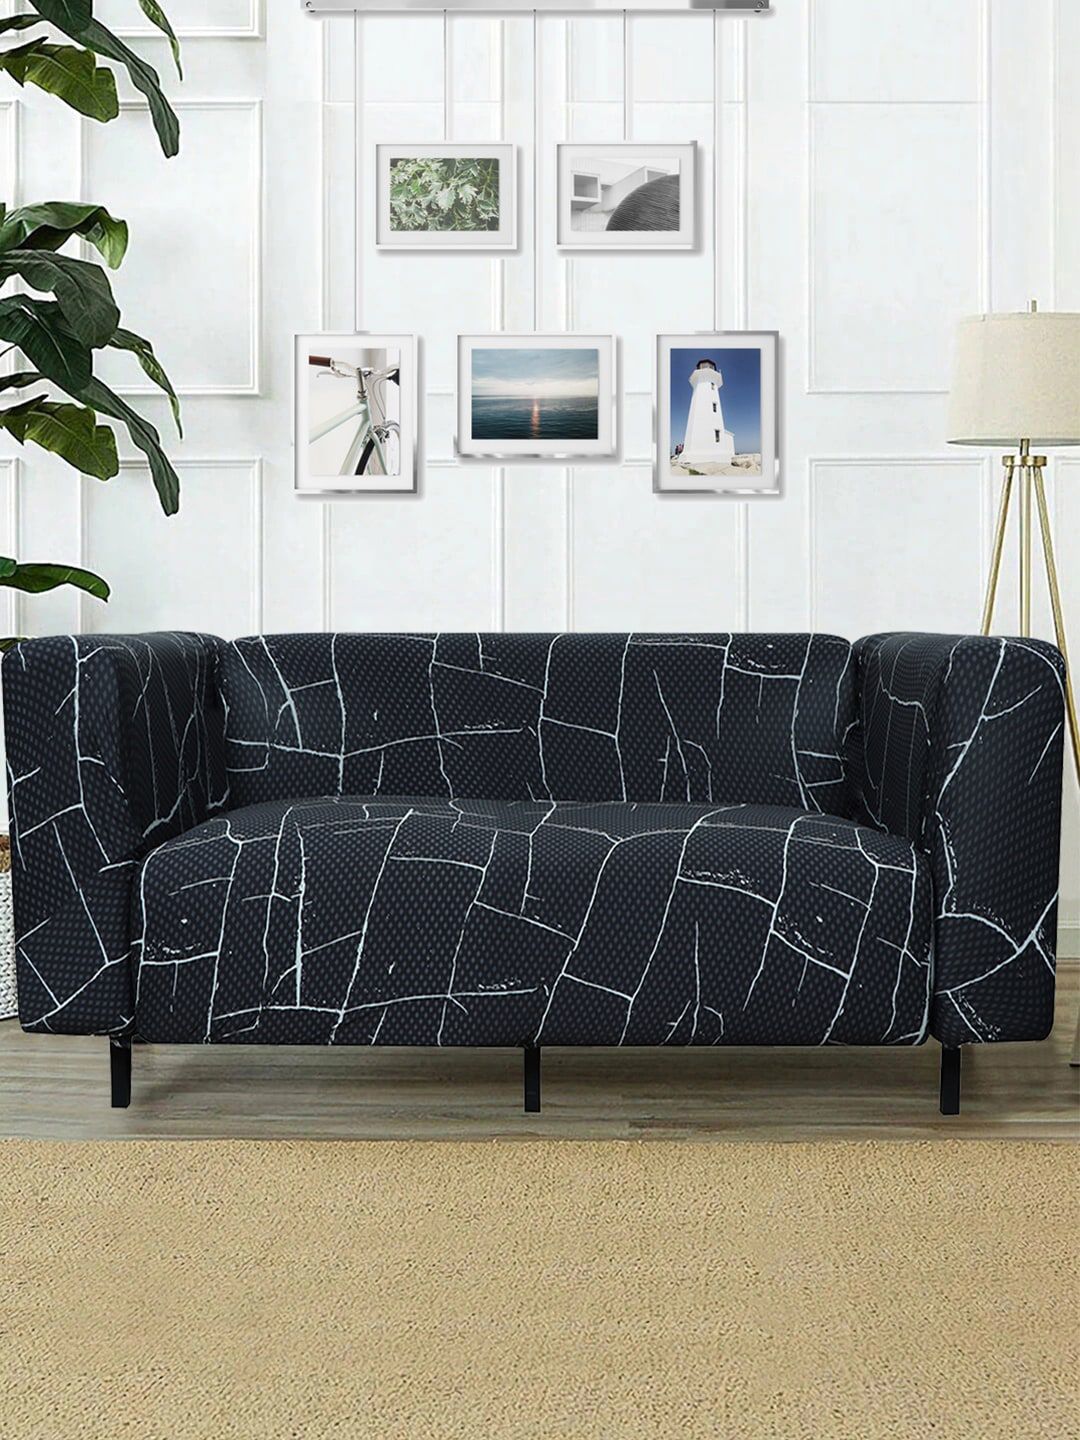 HOUSE OF QUIRK Black Printed Sofa Cover Price in India